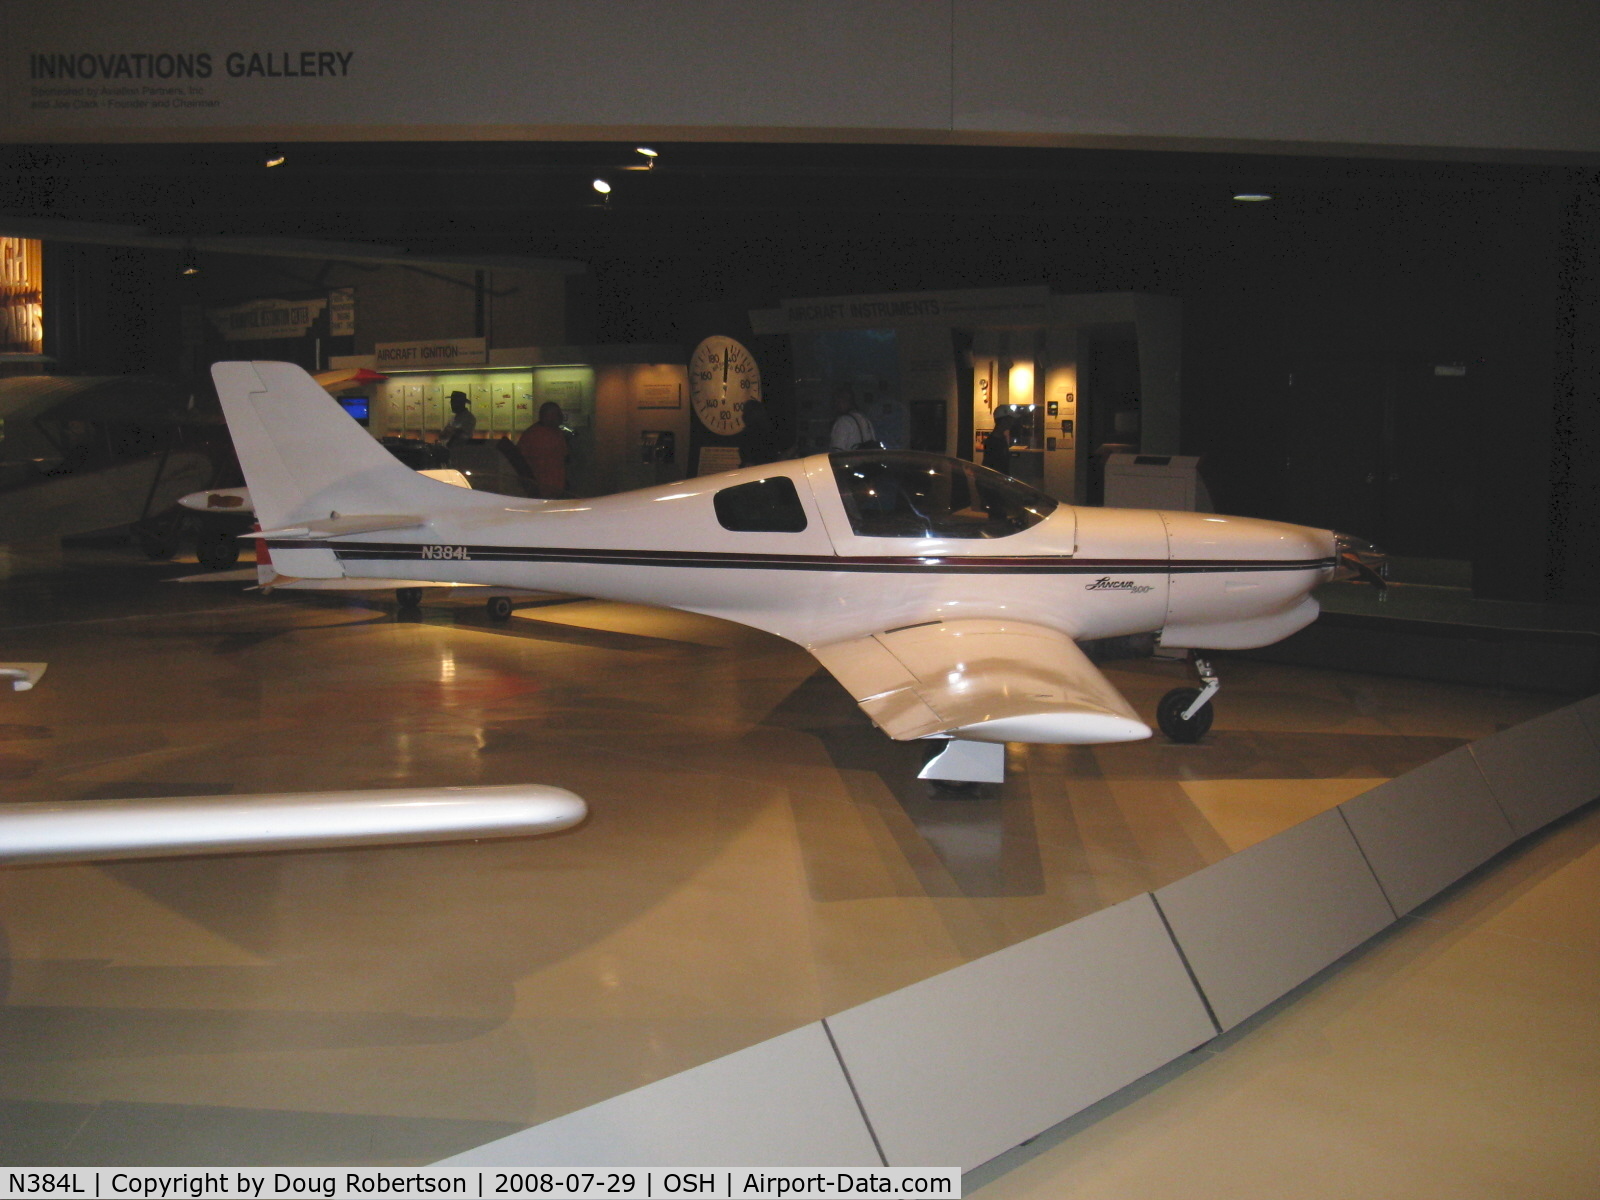 N384L, 1984 Lancair 300 C/N LN1984, 1984 Neibauer LANCER, Continental O-200 100 Hp, forerunner of the Lancair line of experimental aircraft?